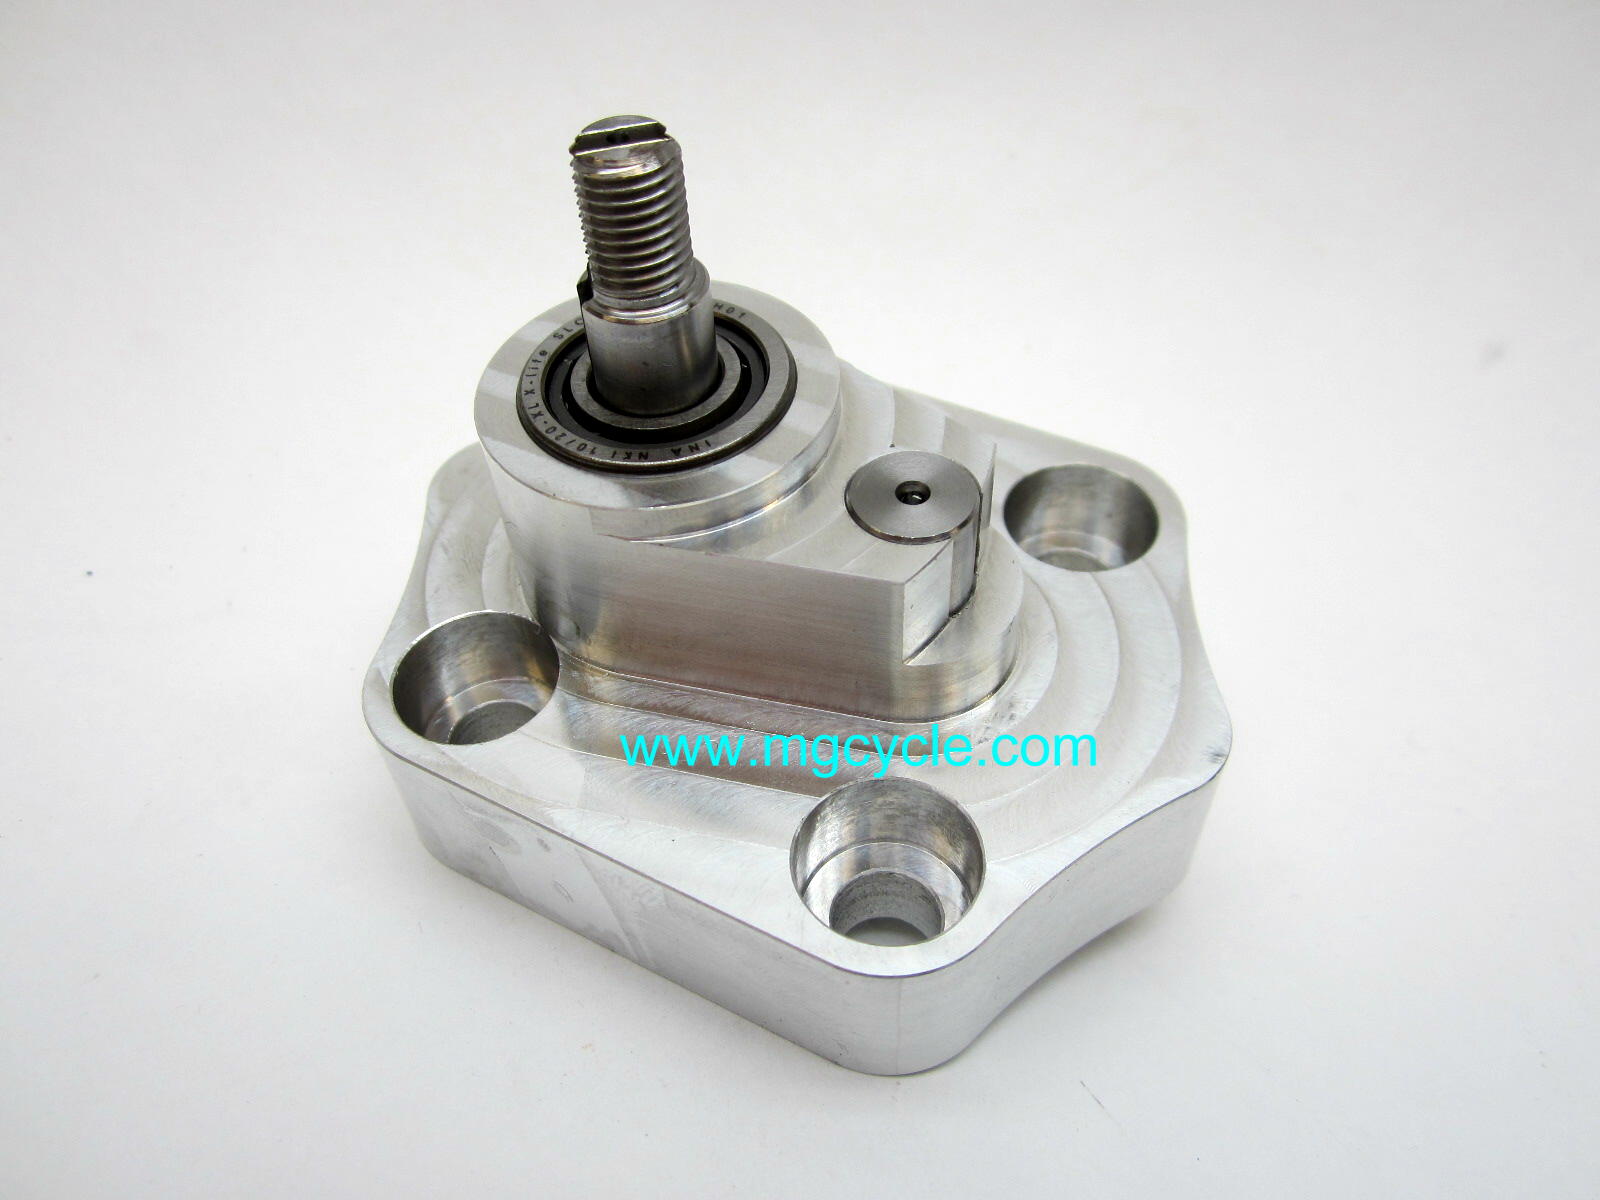 Improved oil pump for two valve big twins, chain driven oil pump